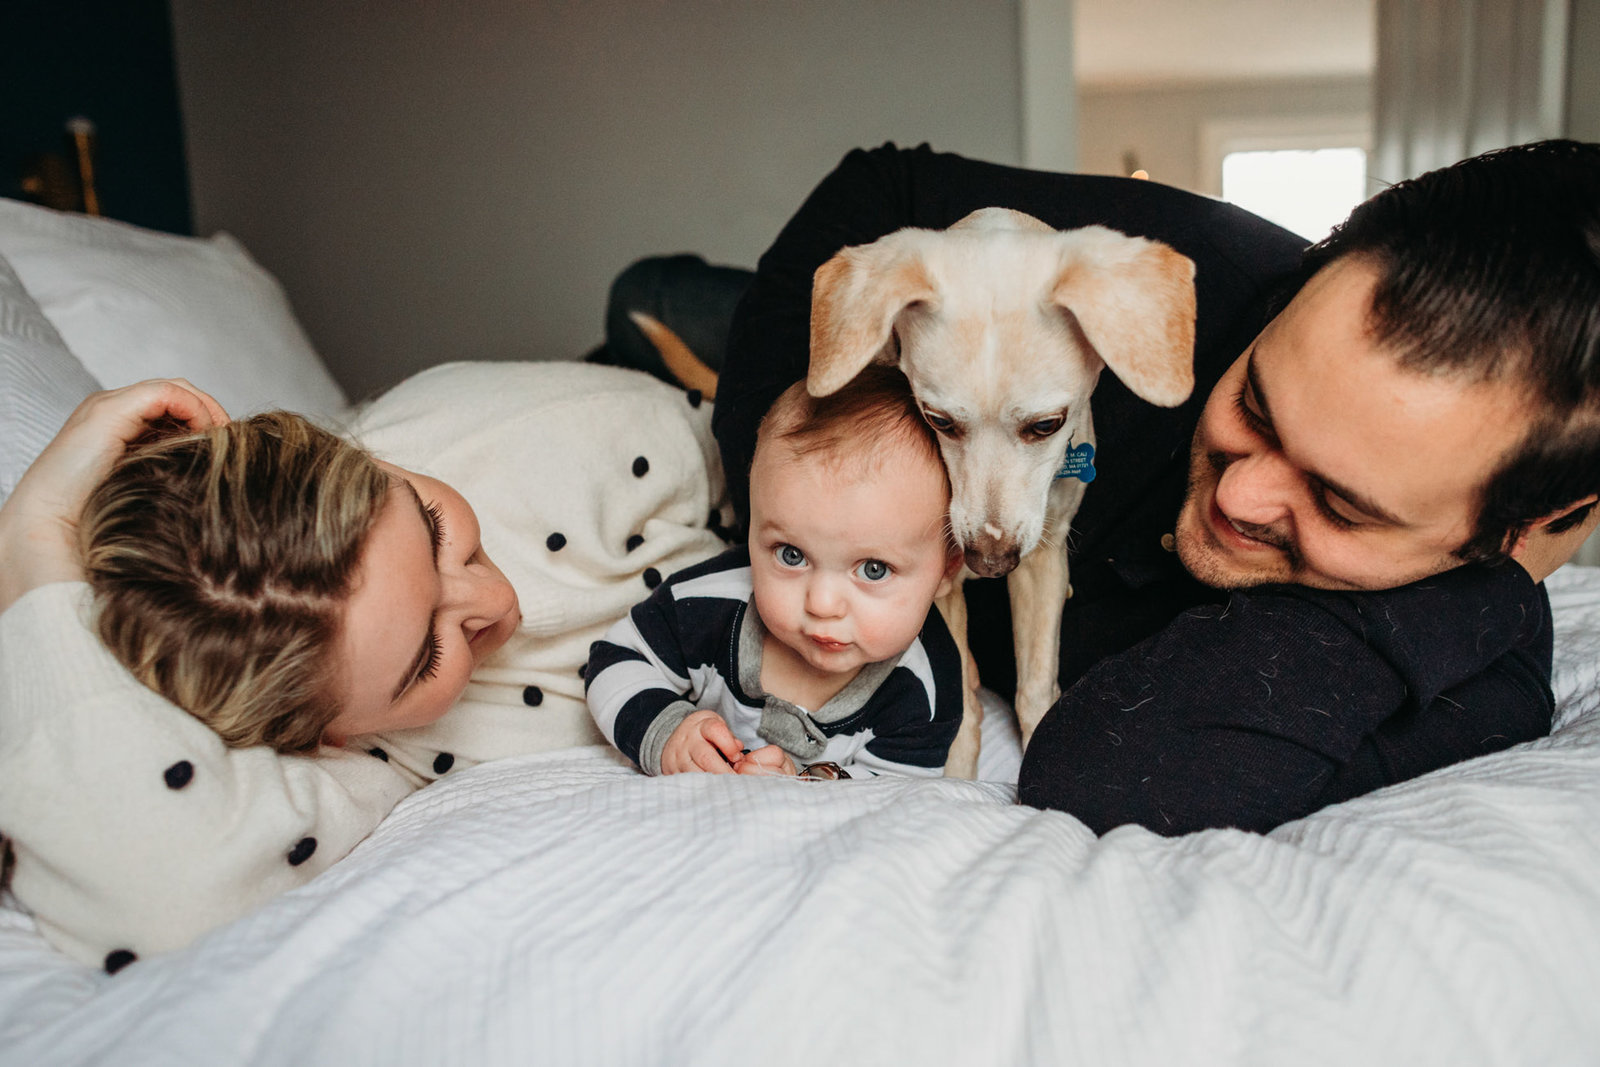 parents snuggle dog and baby on bed